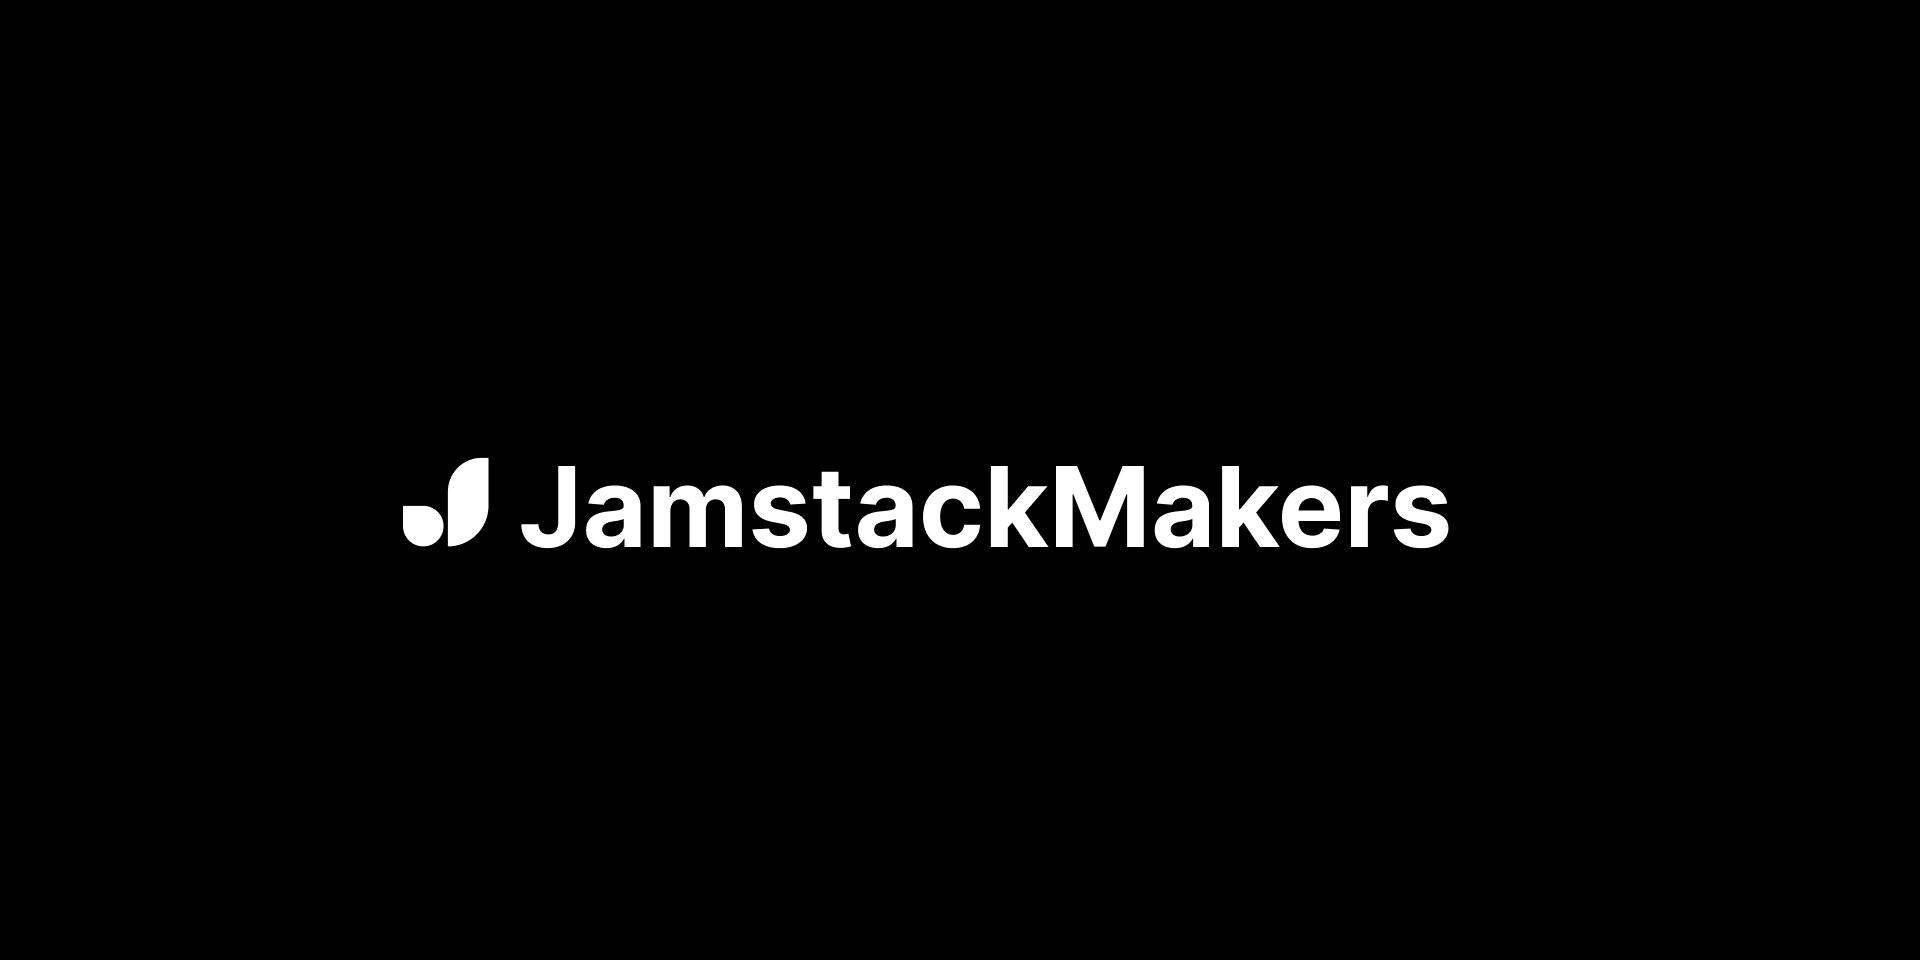 Welcome to Jamstack Makers